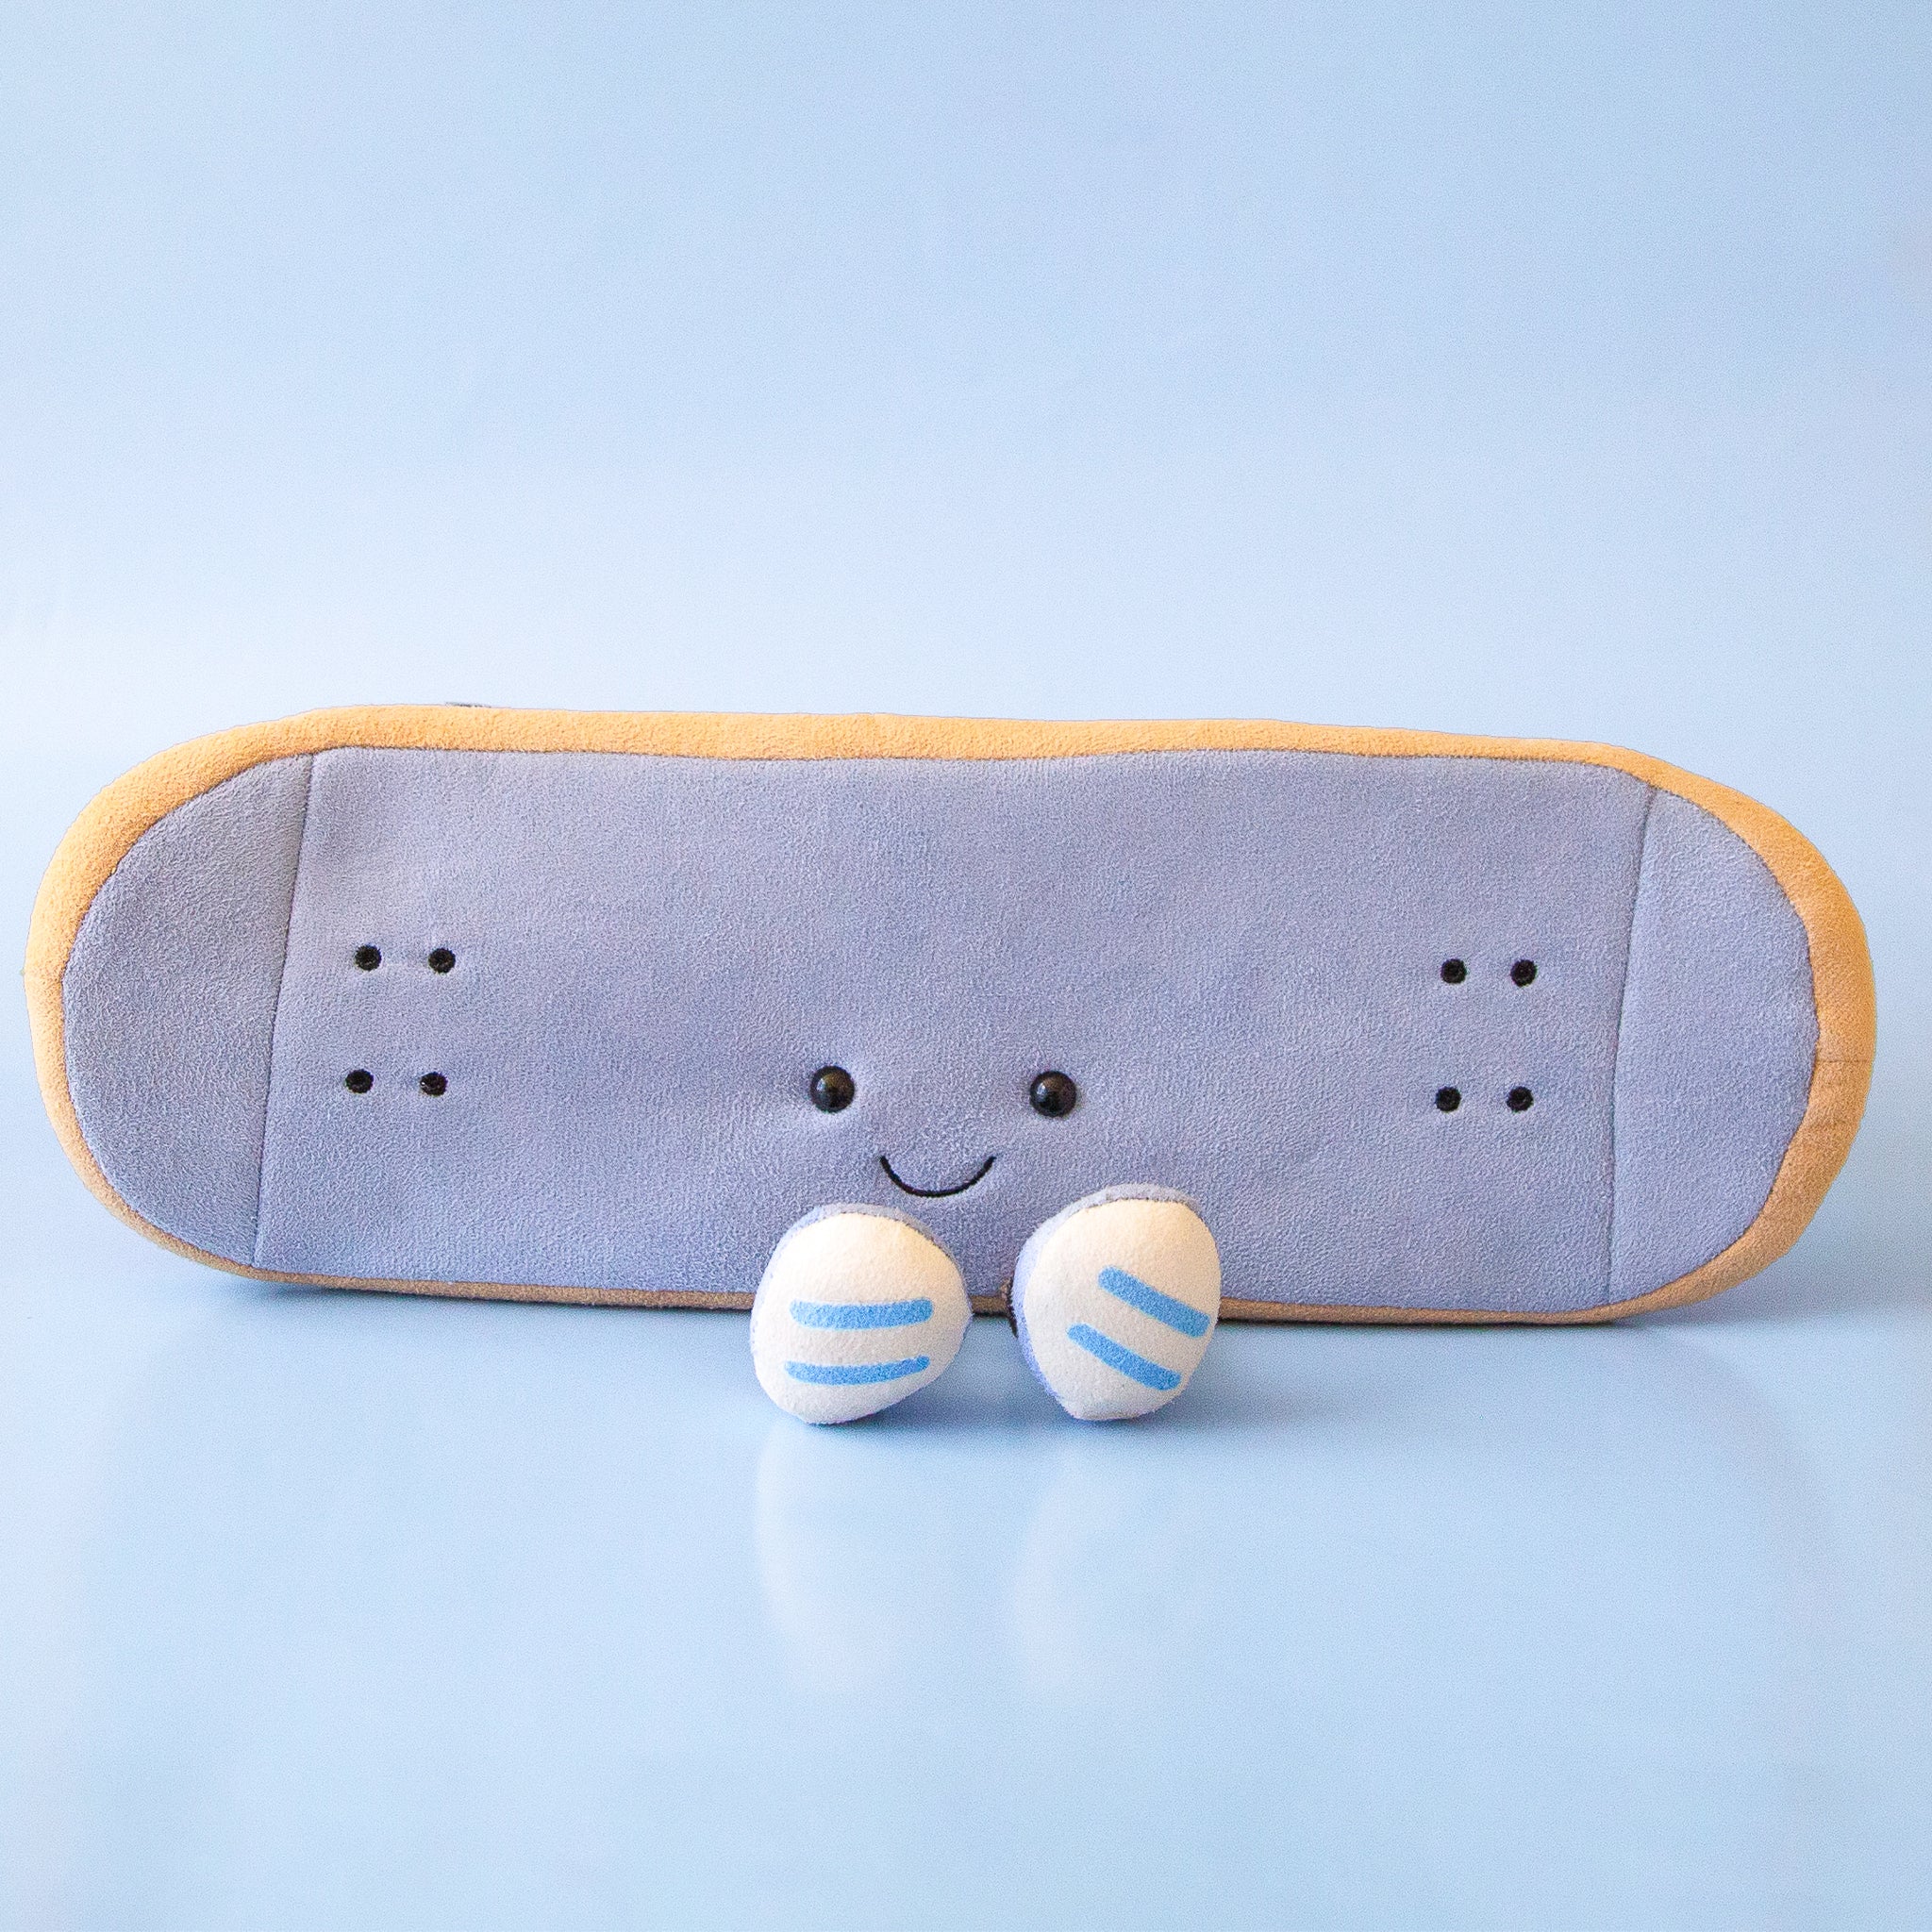 A skateboard shaped stuffed toy with small legs and feet and a smiling face